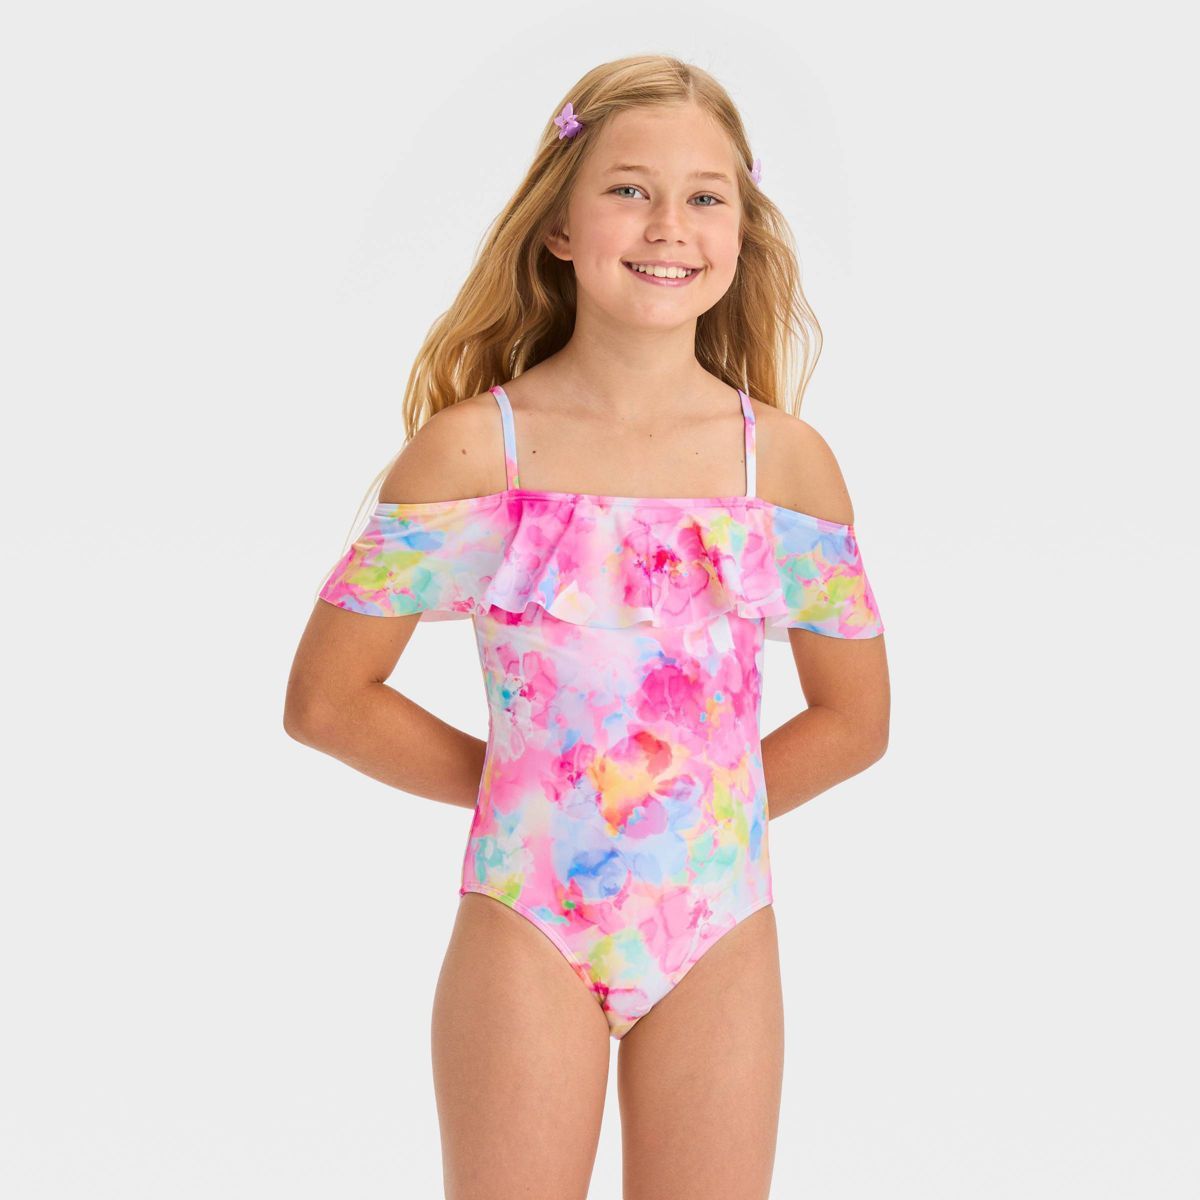 Girls' 'Flower Daydream' Floral Printed One Piece Swimsuit - Cat & Jack™ White/Pink | Target